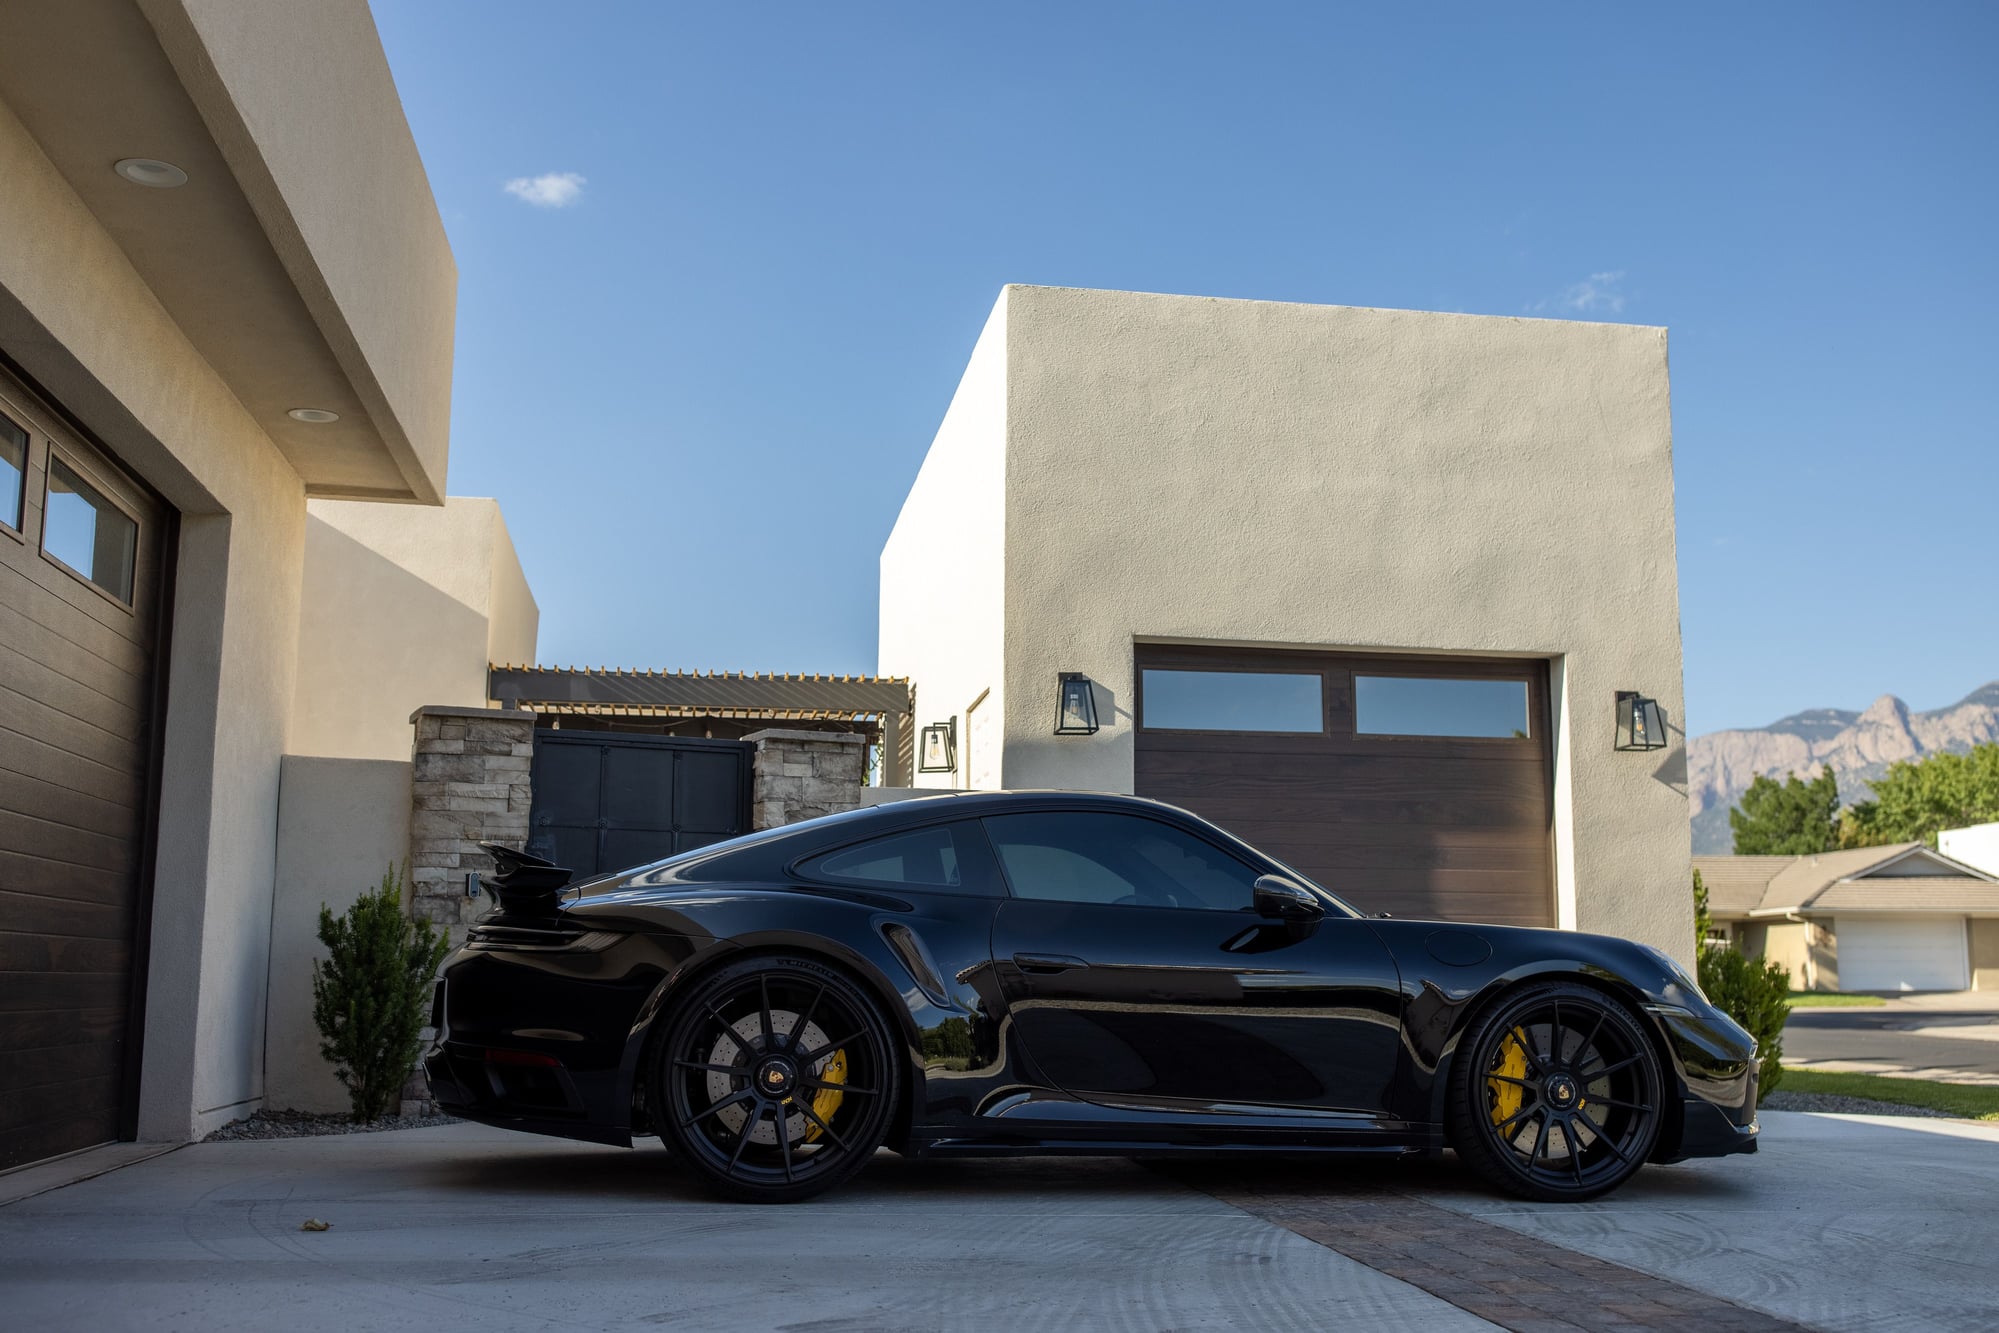 2021 Porsche 911 - Turbo s - 992, loaded - Used - VIN WP0AD2A90MS258188 - 4,750 Miles - 6 cyl - AWD - Automatic - Coupe - Black - Albuquerque, NM 87111, United States